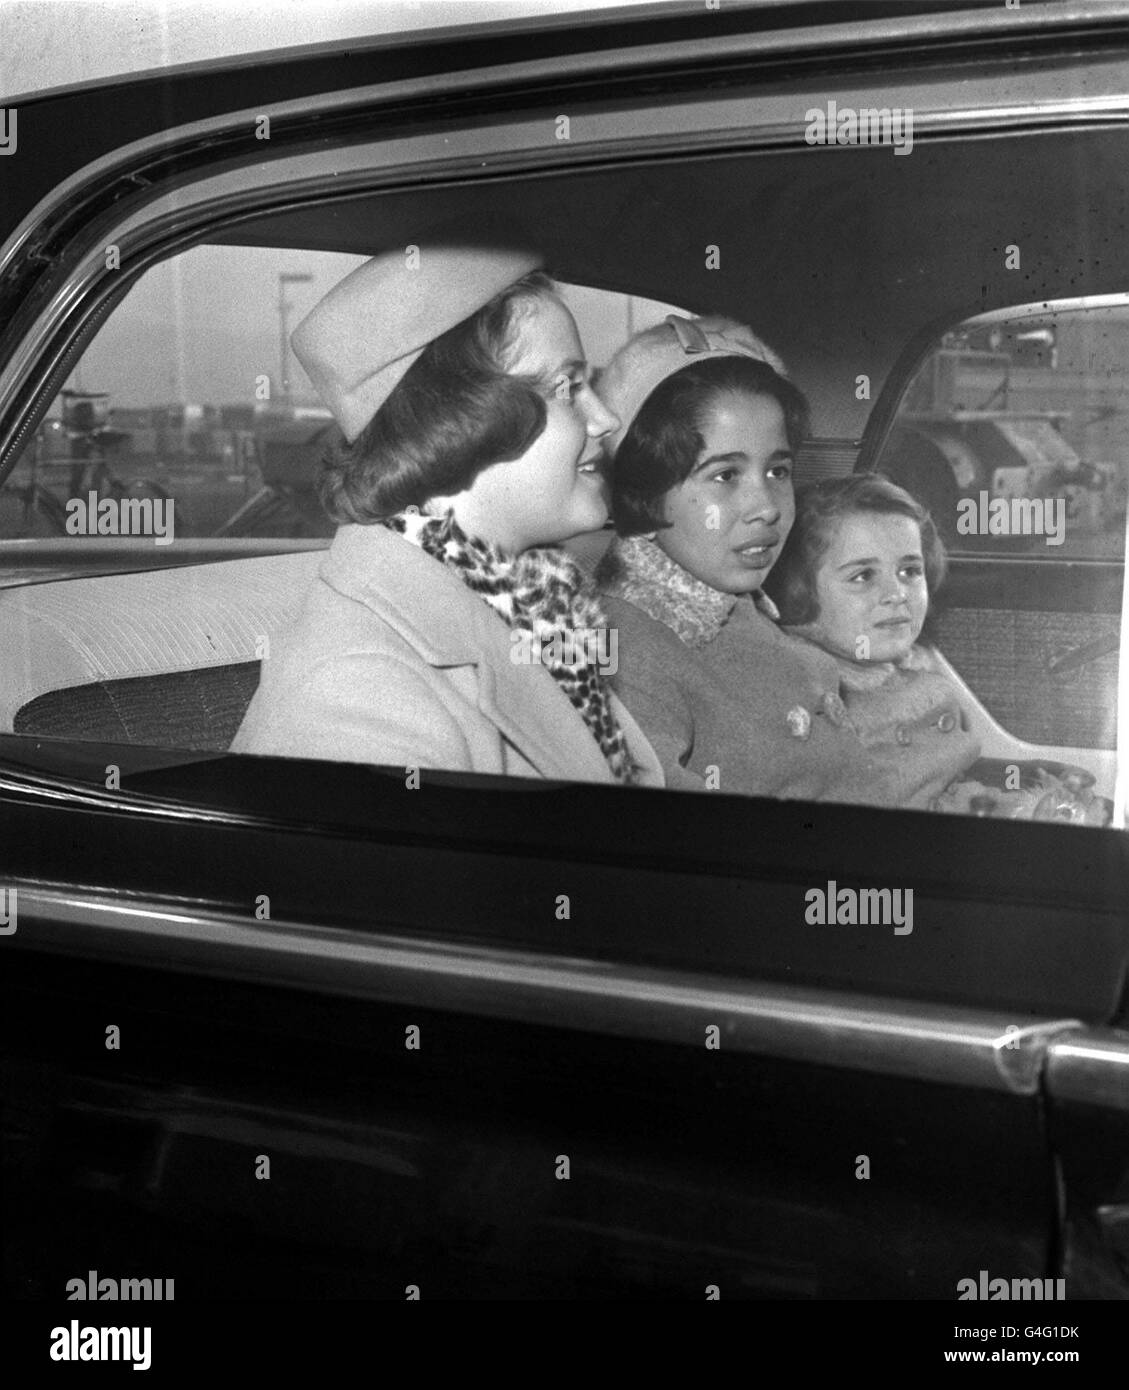 PRINCESS MUNA AL HUSSEIN (FORMERLY TONI GARDINER), IPSWICH-BORN WIFE OF  KING HUSSEIN OF JORDAN, DRIVES FROM LONDON AIRPORT WITH PRINCESS ALIA  (RIGHT) HER HUSBAND'S DAUGHTER BY HIS FIRST WIFE, EX-QUEEN DINA AND